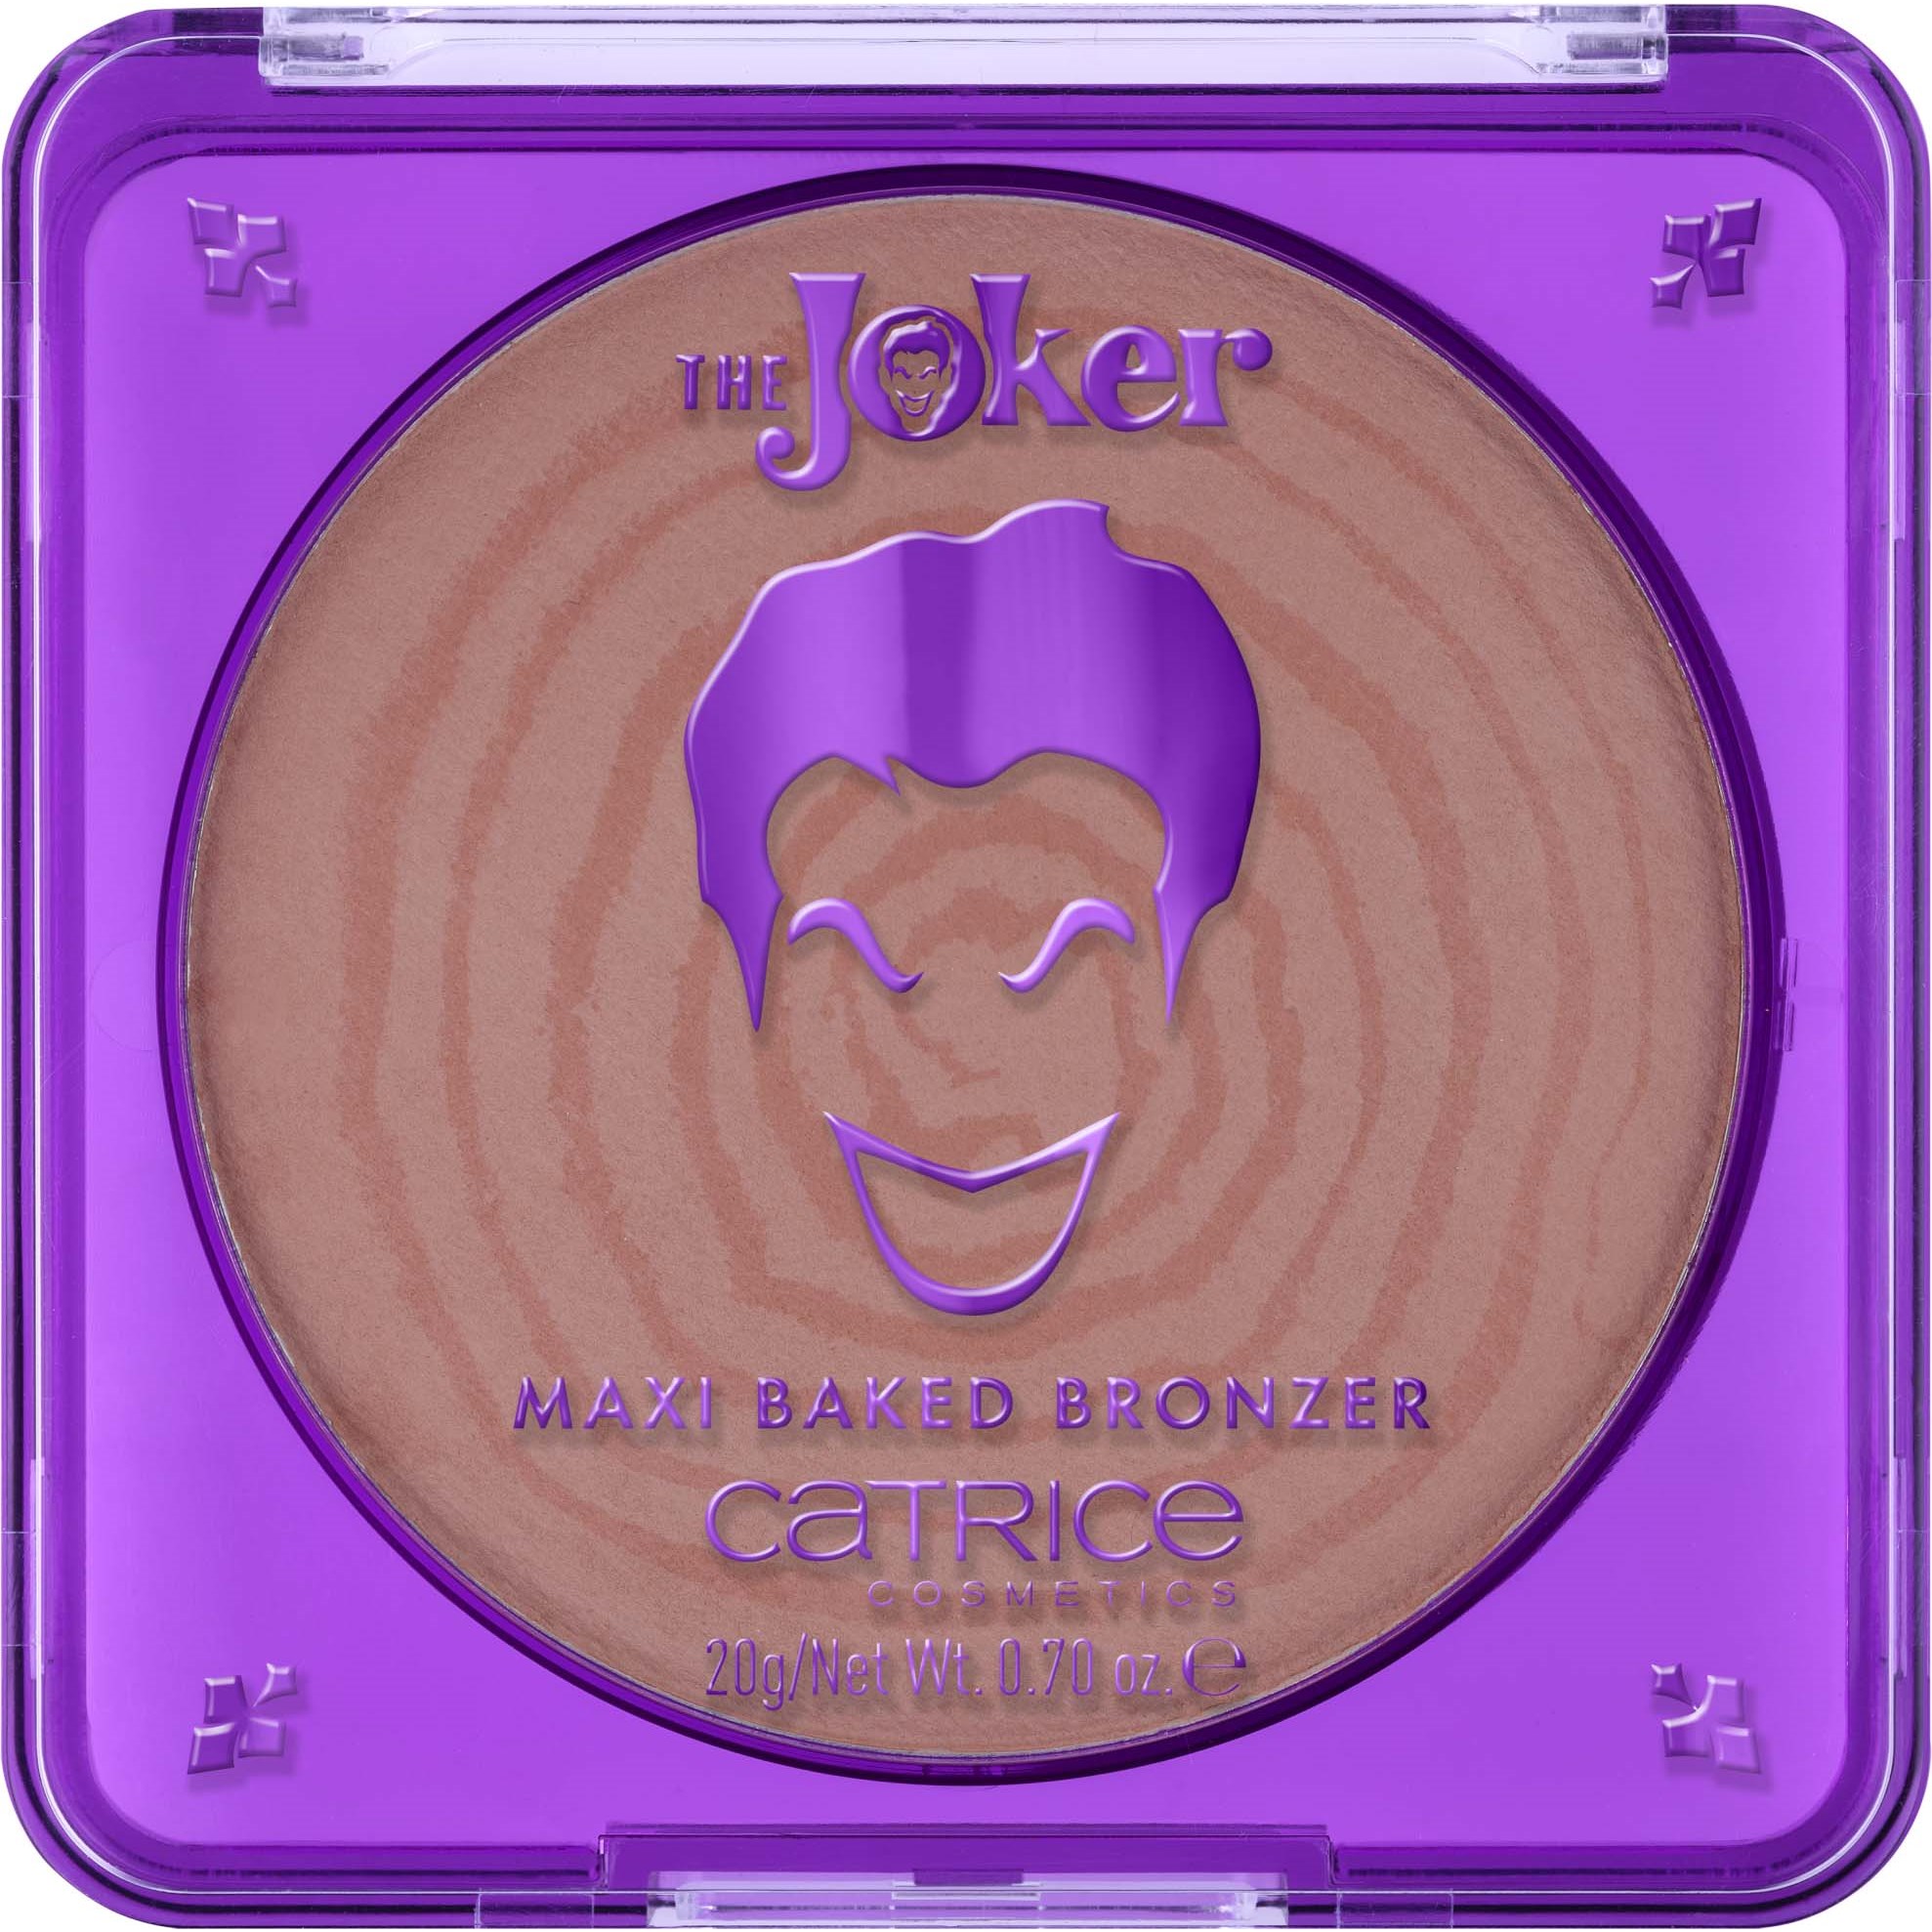 Catrice The Joker Maxi Baked Bronzer 010 Cant Catch Me